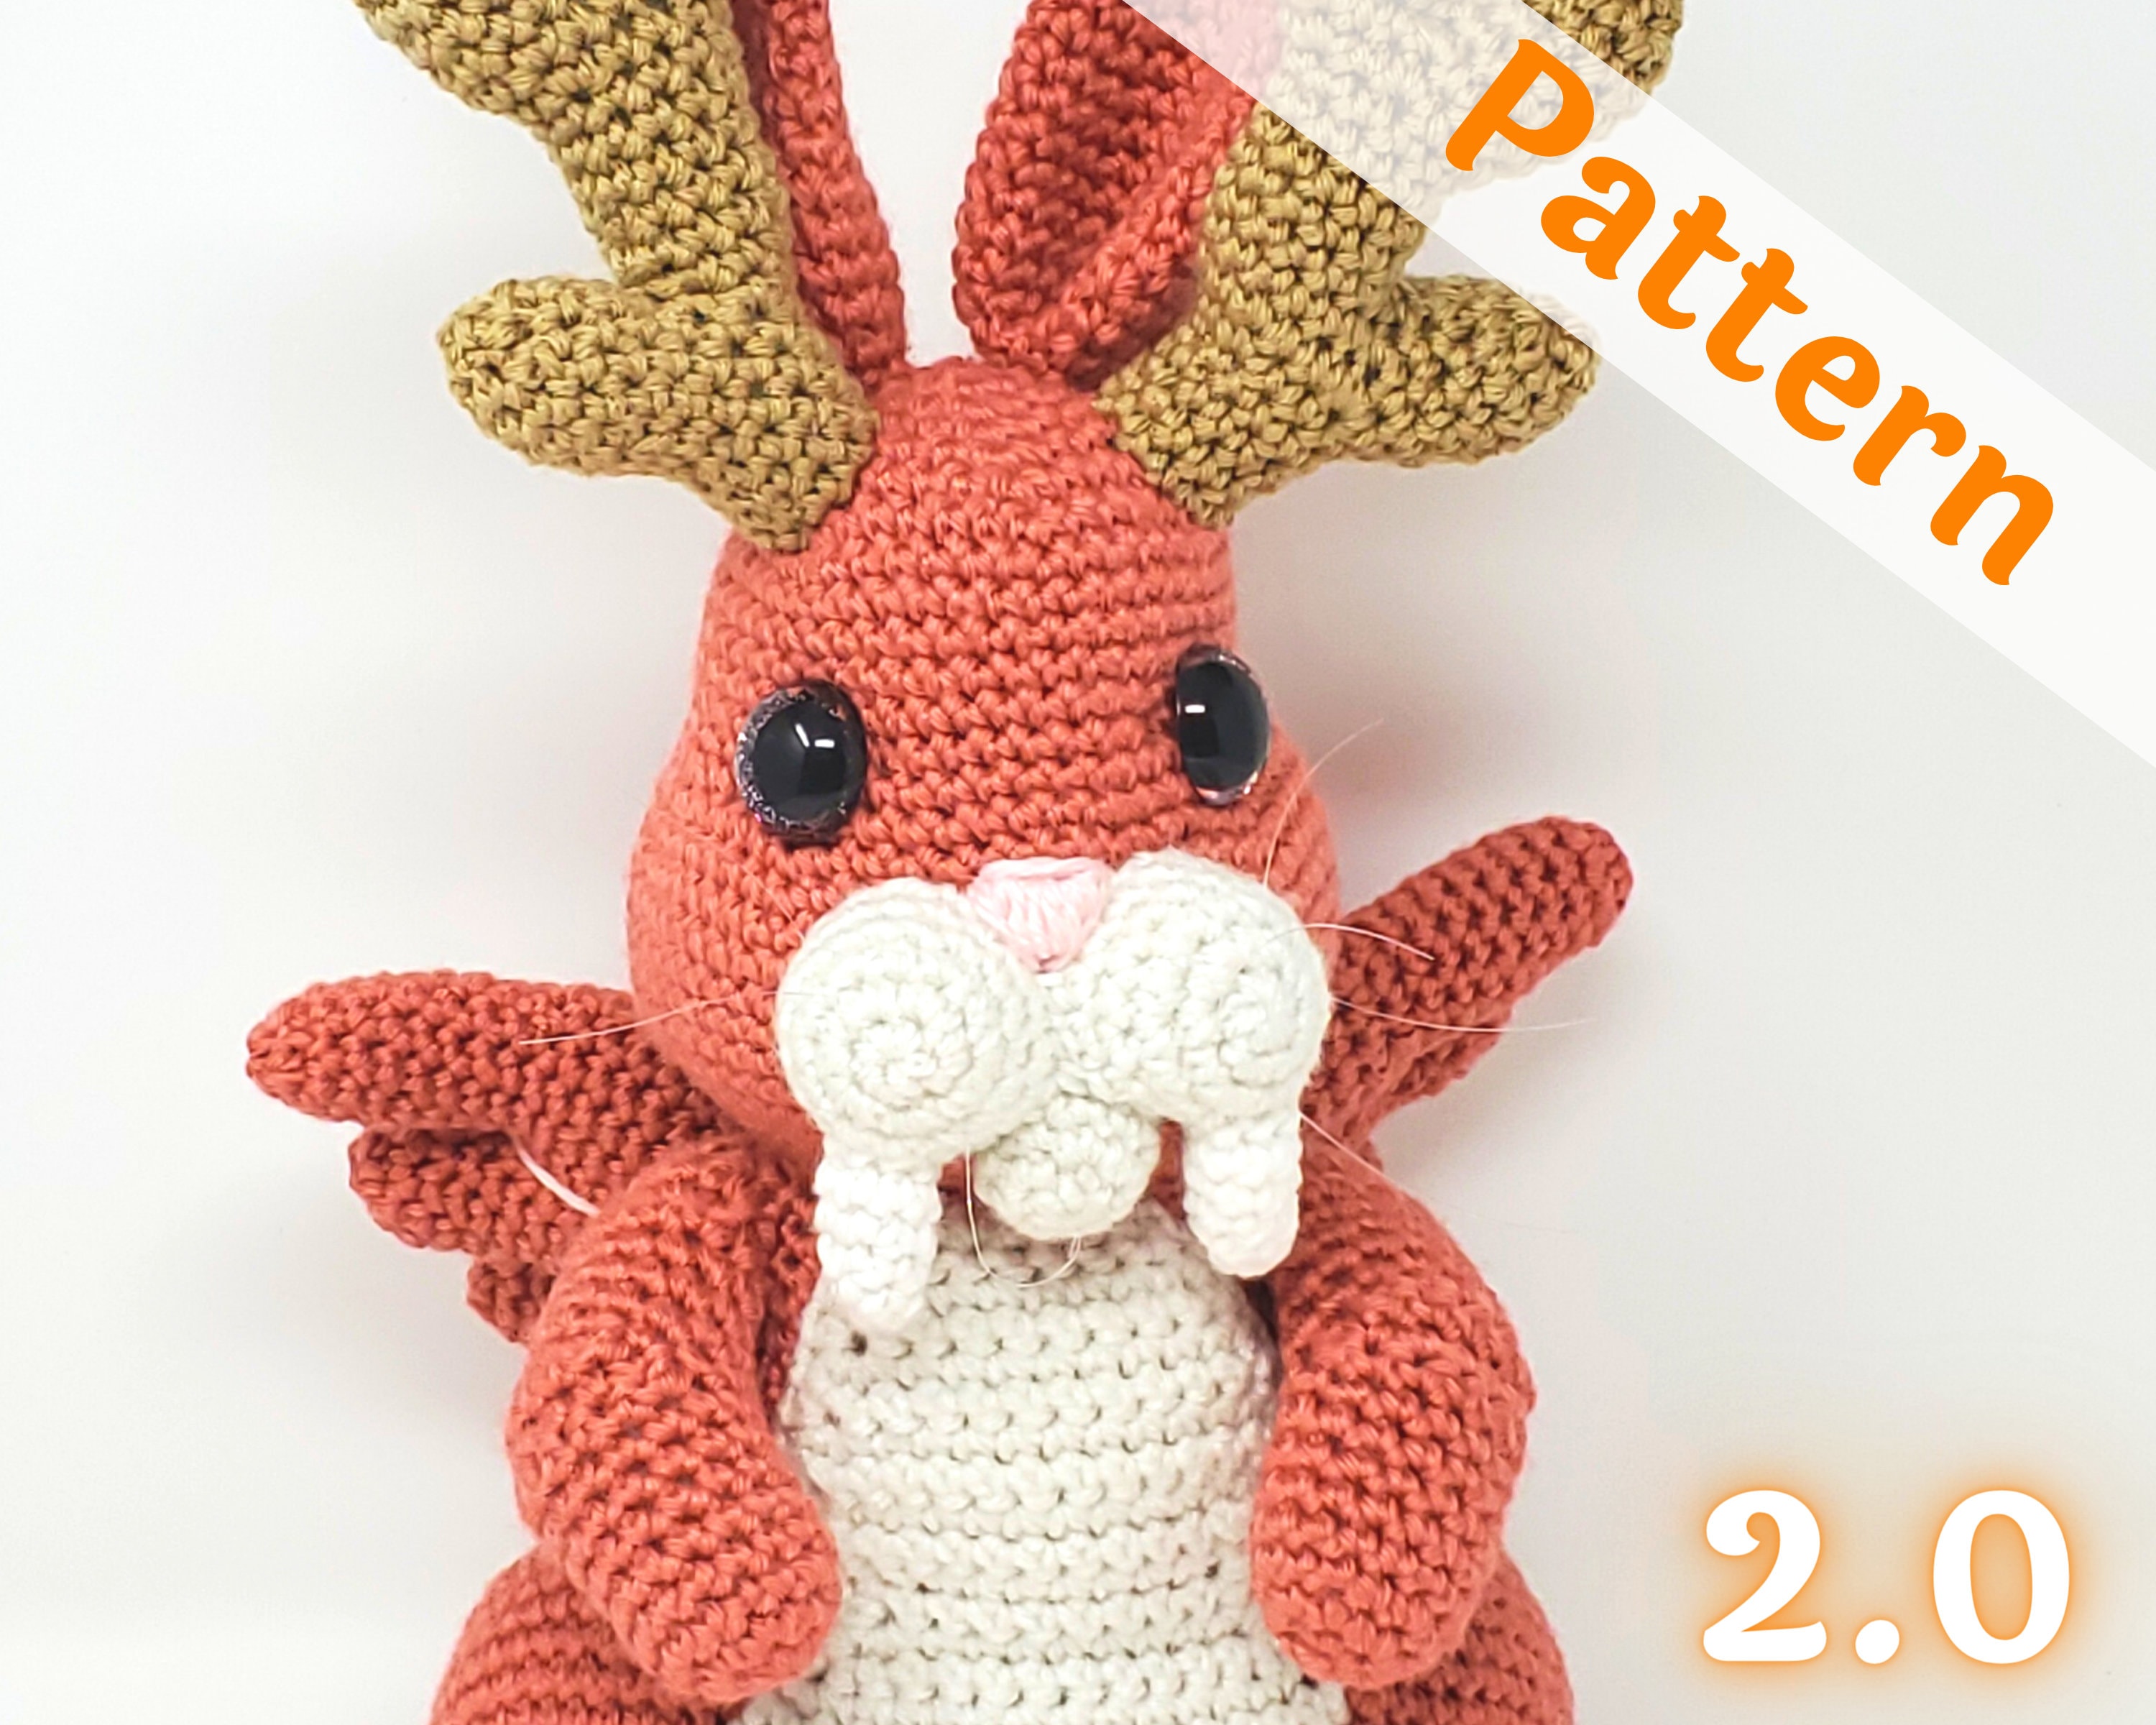 Jackalope from A Crochet World of Creepy Creatures and Cryptids : r/ Amigurumi